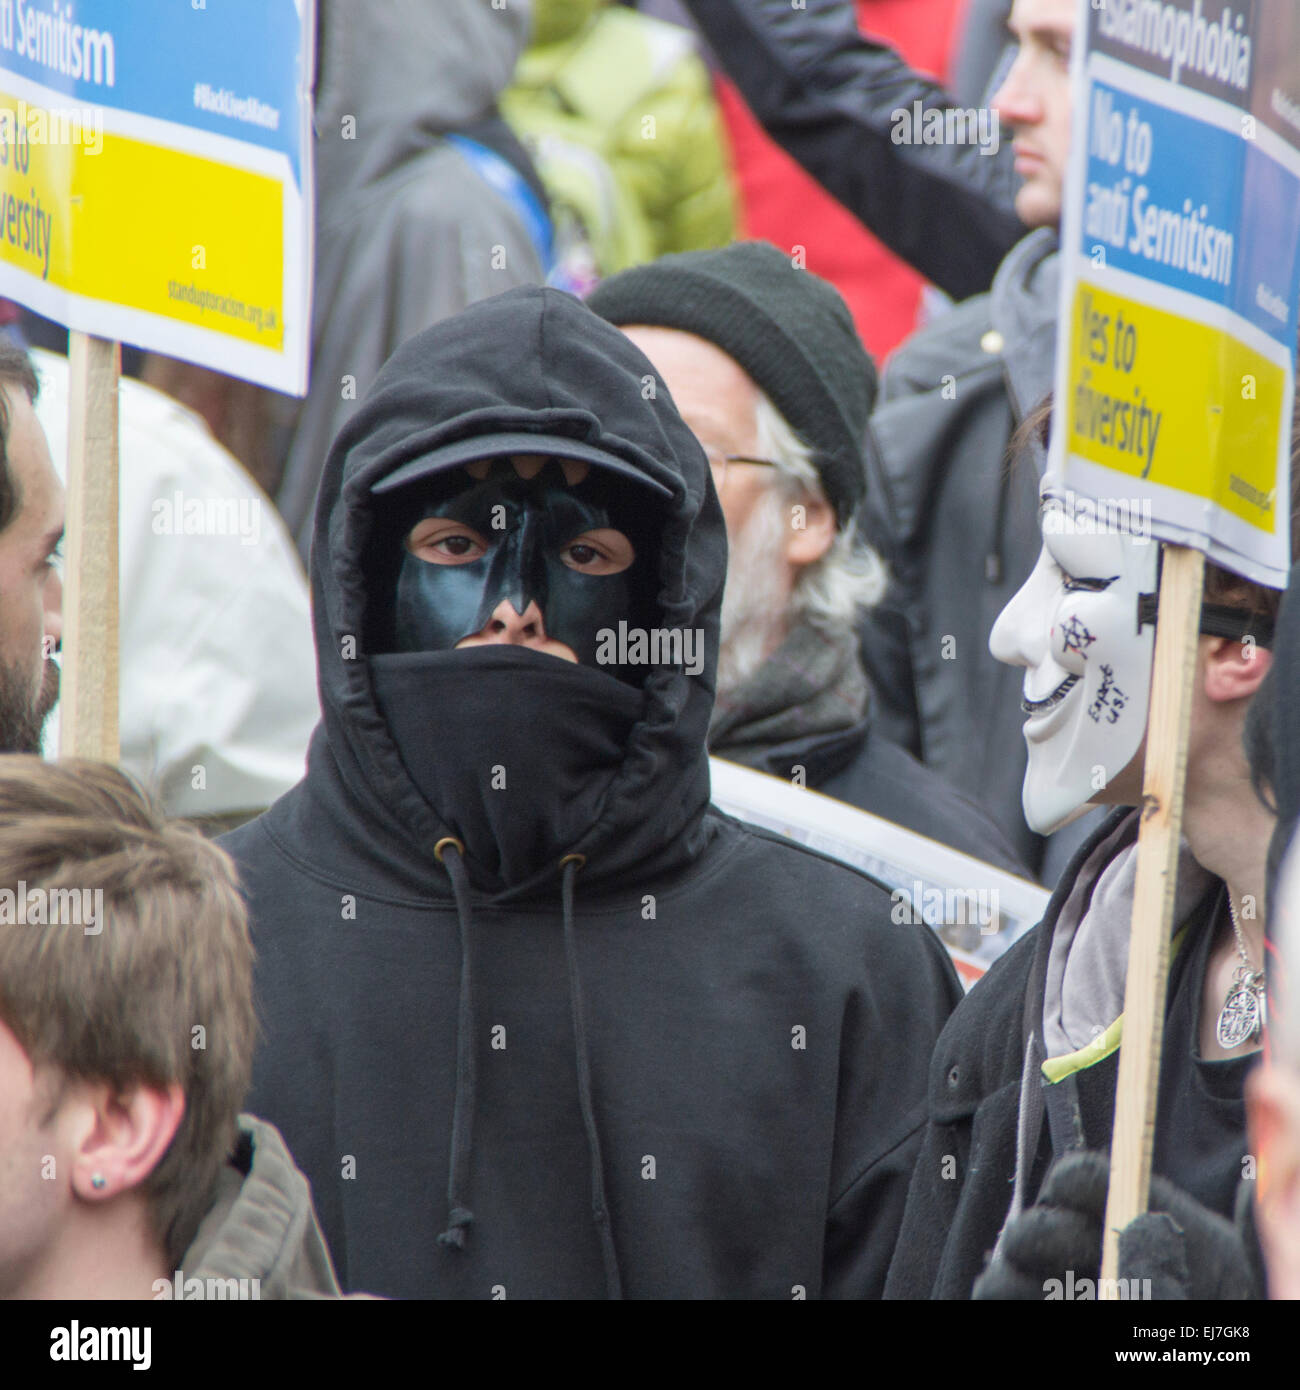 Piccadilly Circus, London UK - March 21st 2015: Dressed in black a masked protester in the crowd at the Stand Up To Racism & Fascism demonstration. Stock Photo